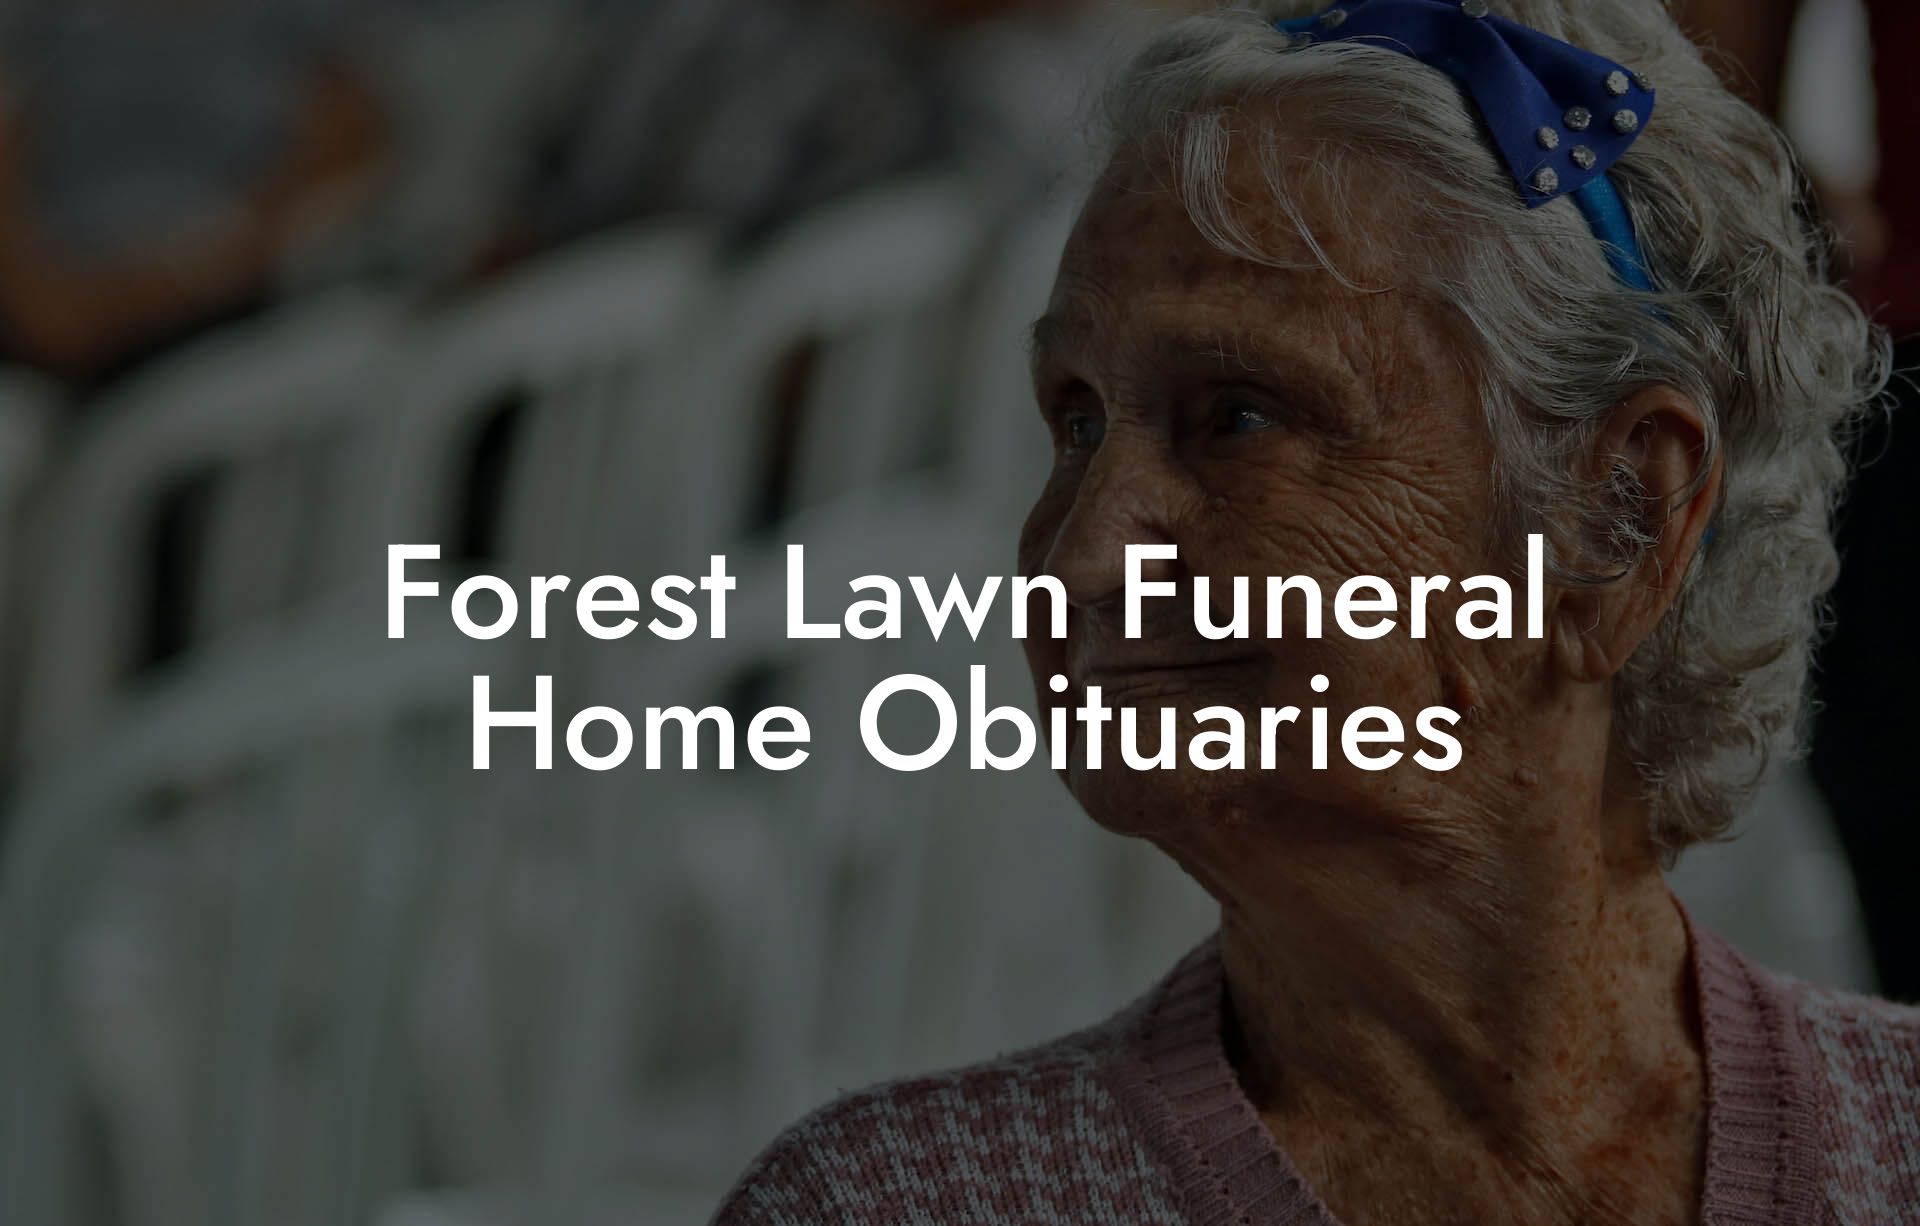 Forest Lawn Funeral Home Obituaries